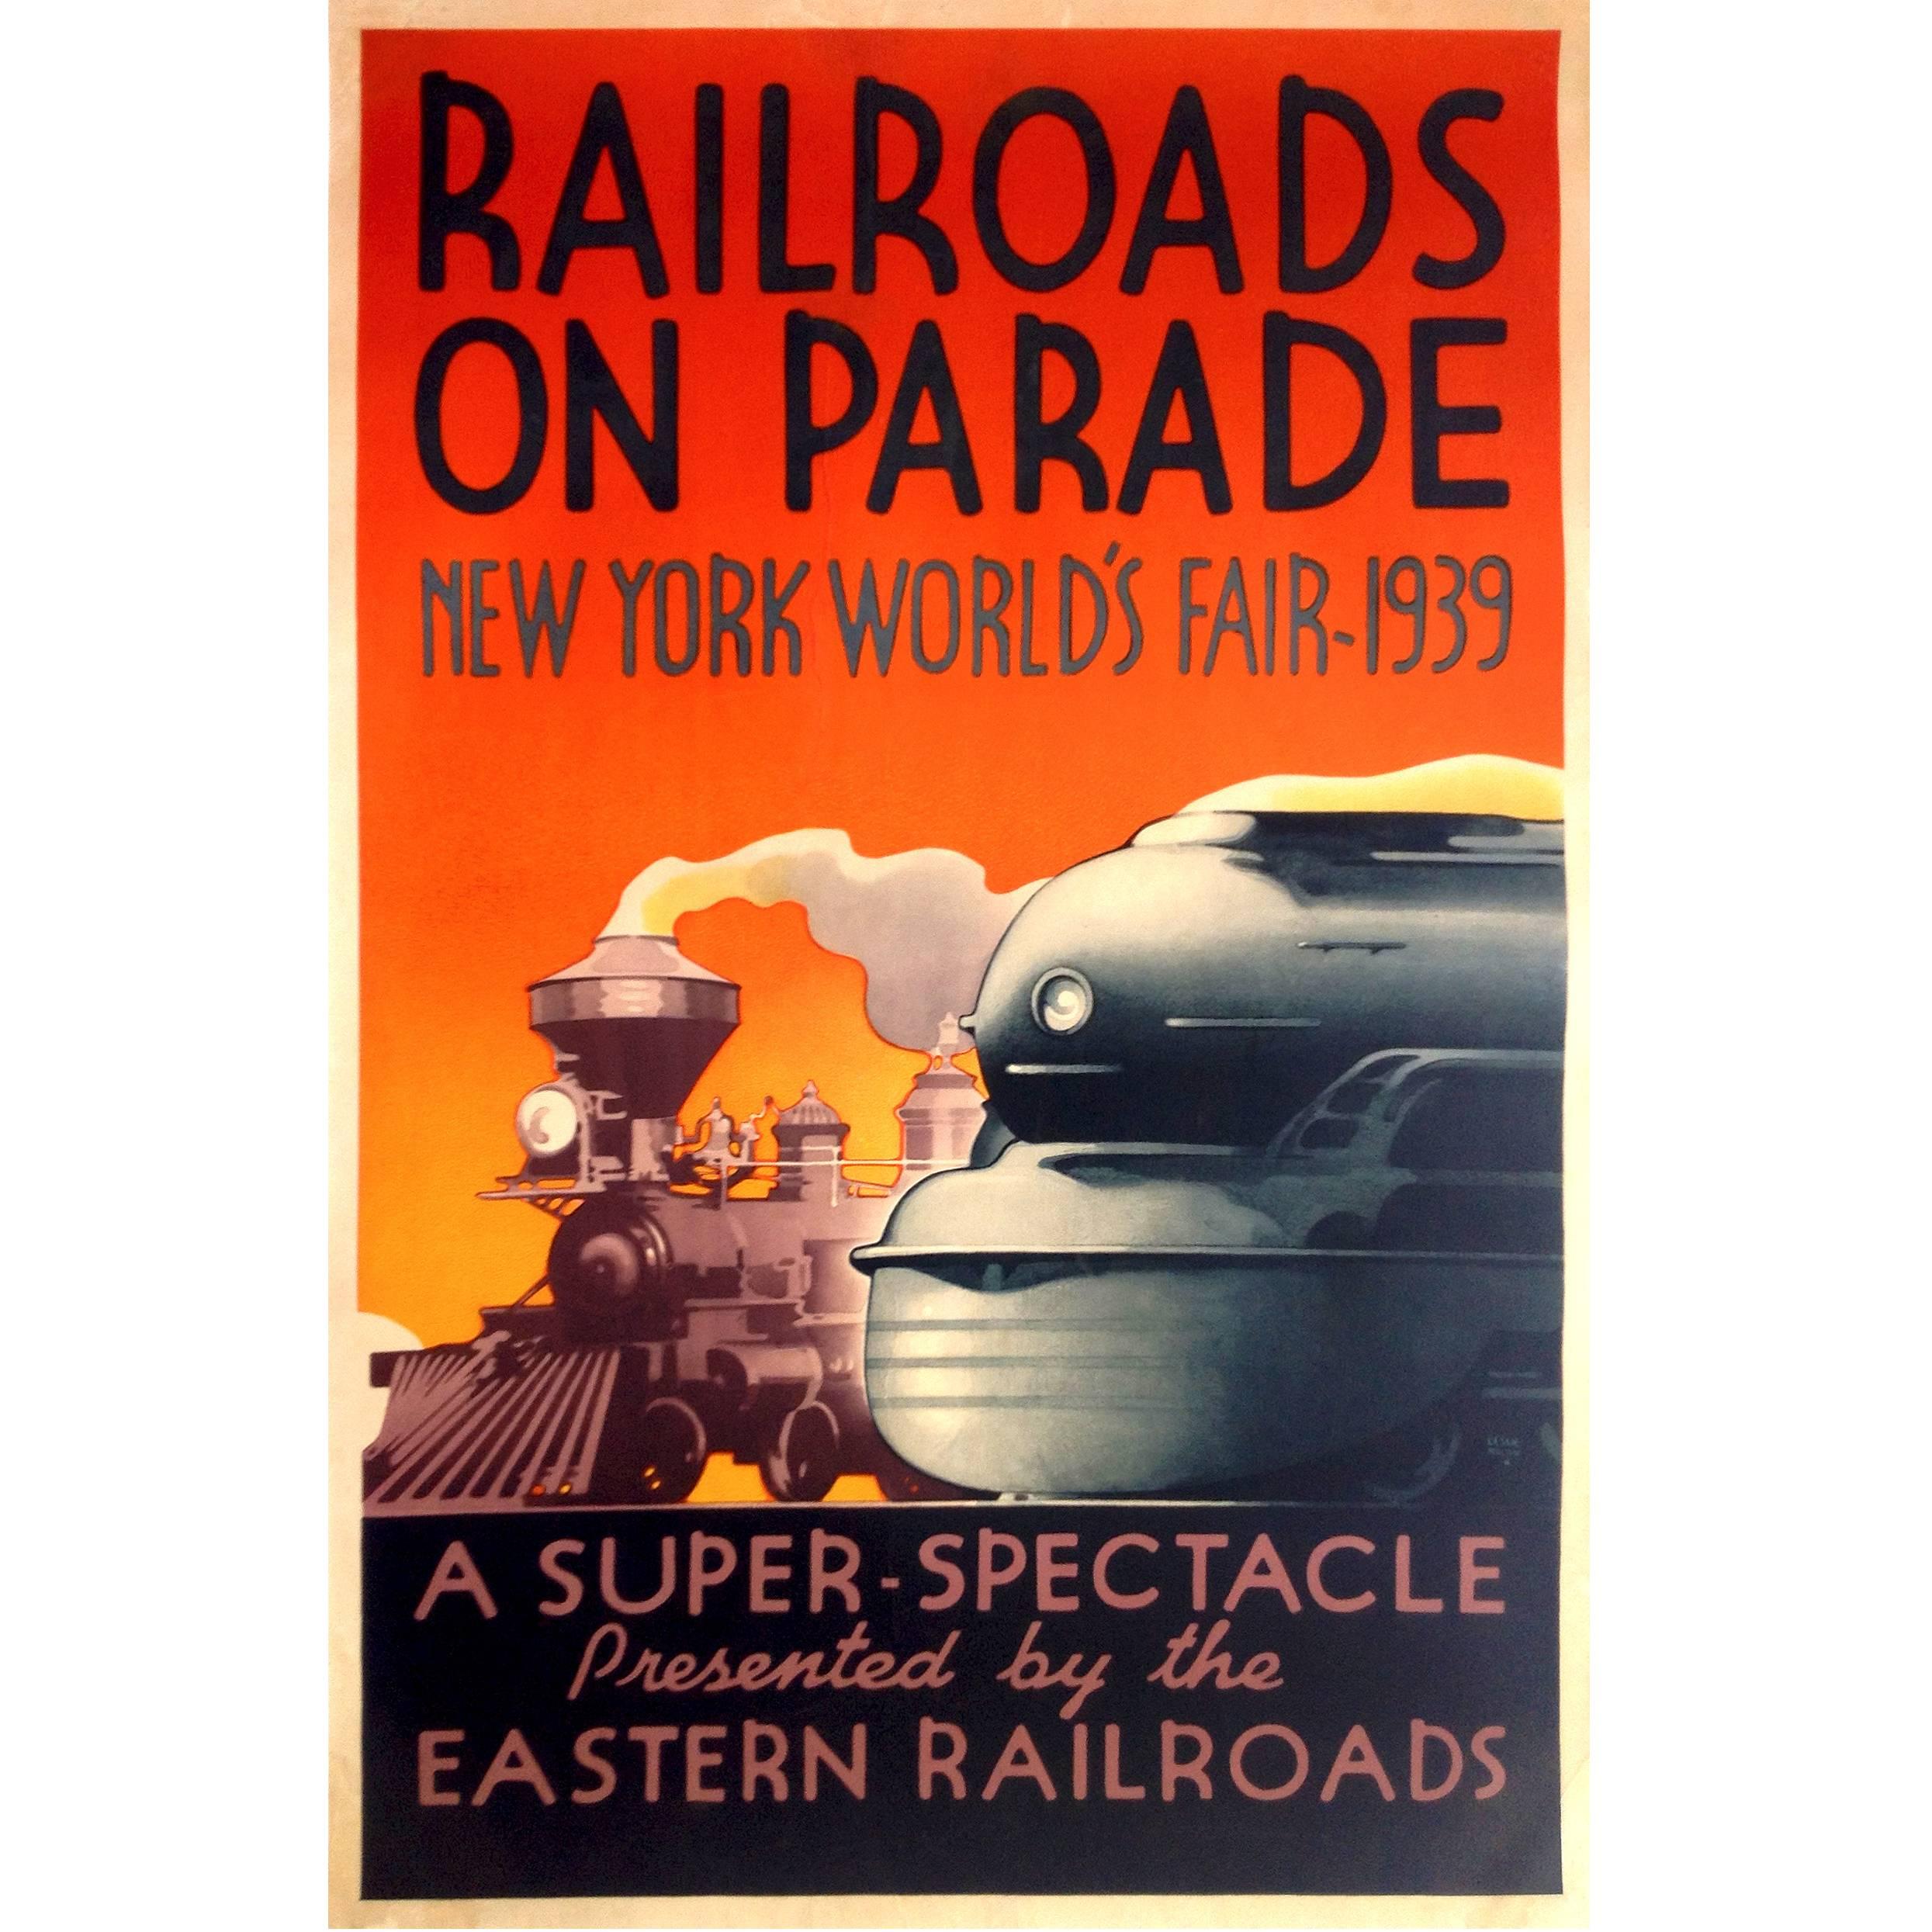 Rare American Poster for the New York World's Fair 1939, "Railroads on Parade"